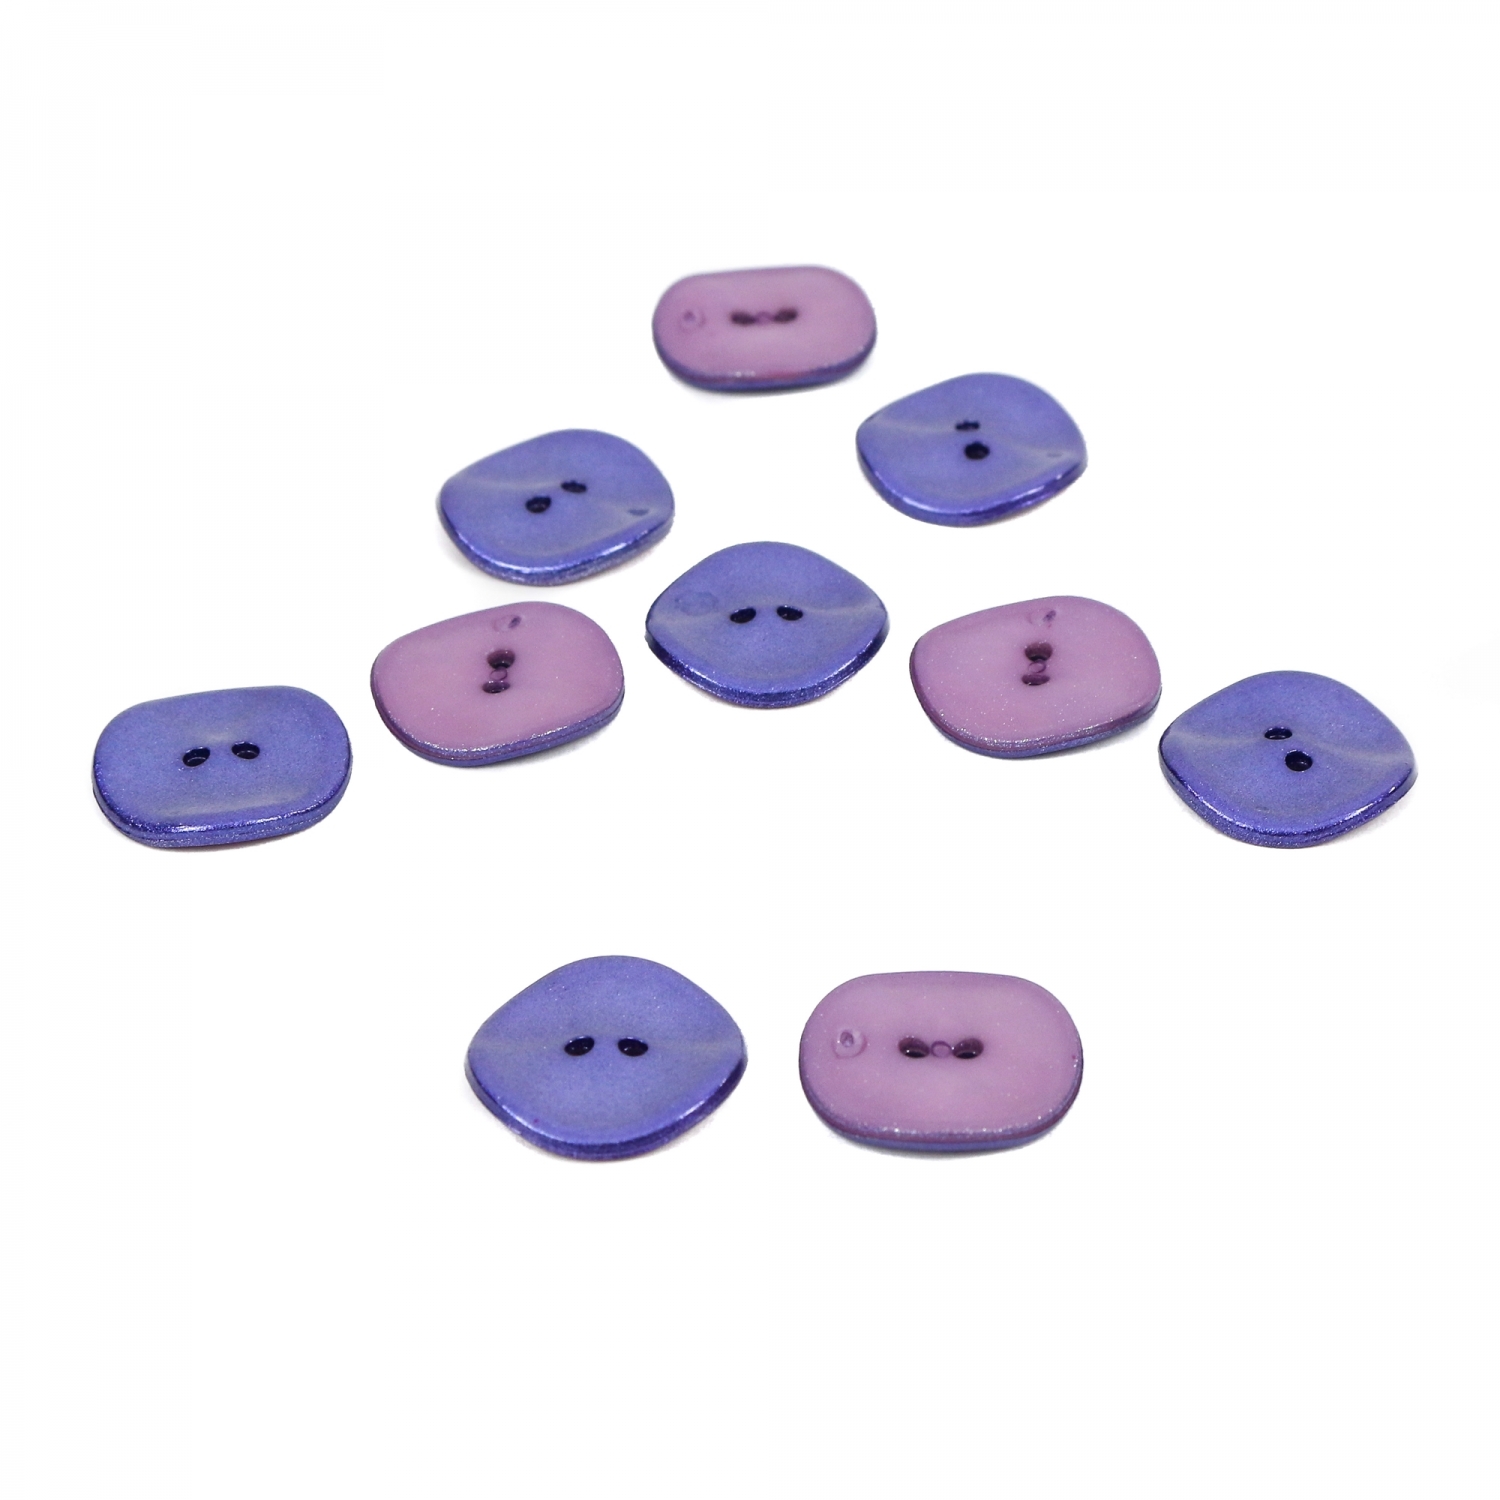 2 Holes Buttons, 23 mm  (50 pcs/pack)Code: 25413/36